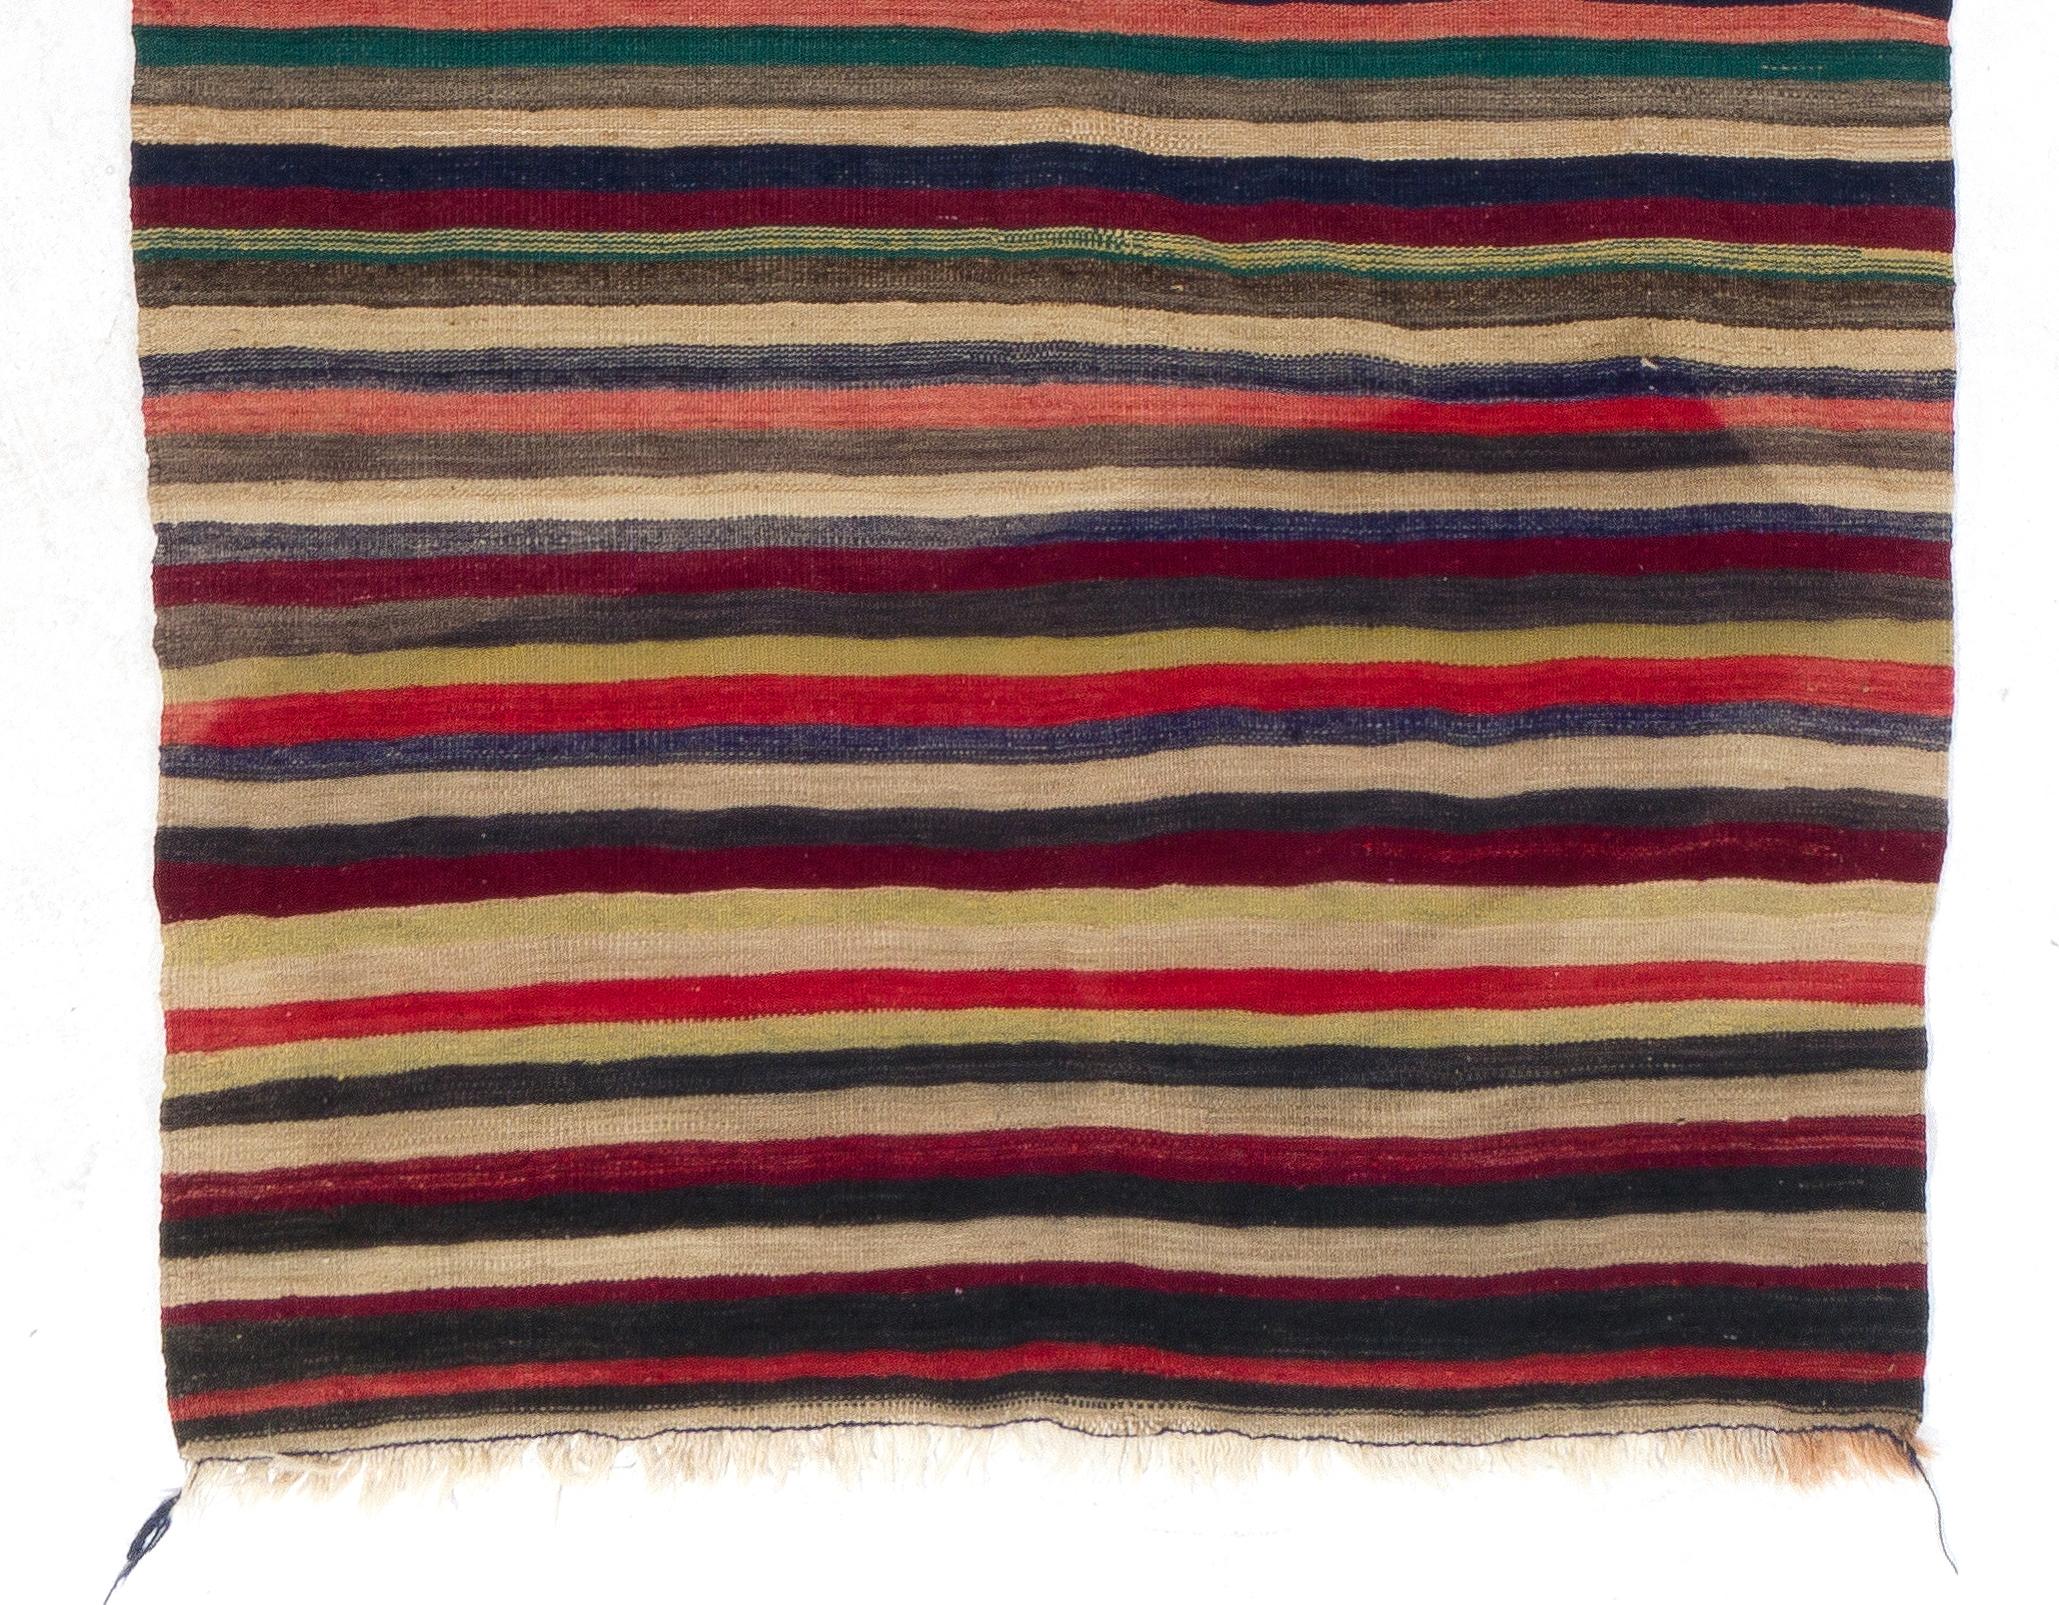 20th Century 4.7x11.8 Ft Runner Kilim in Multicolor Stripe Pattern, Hand-Woven Turkish Rug For Sale